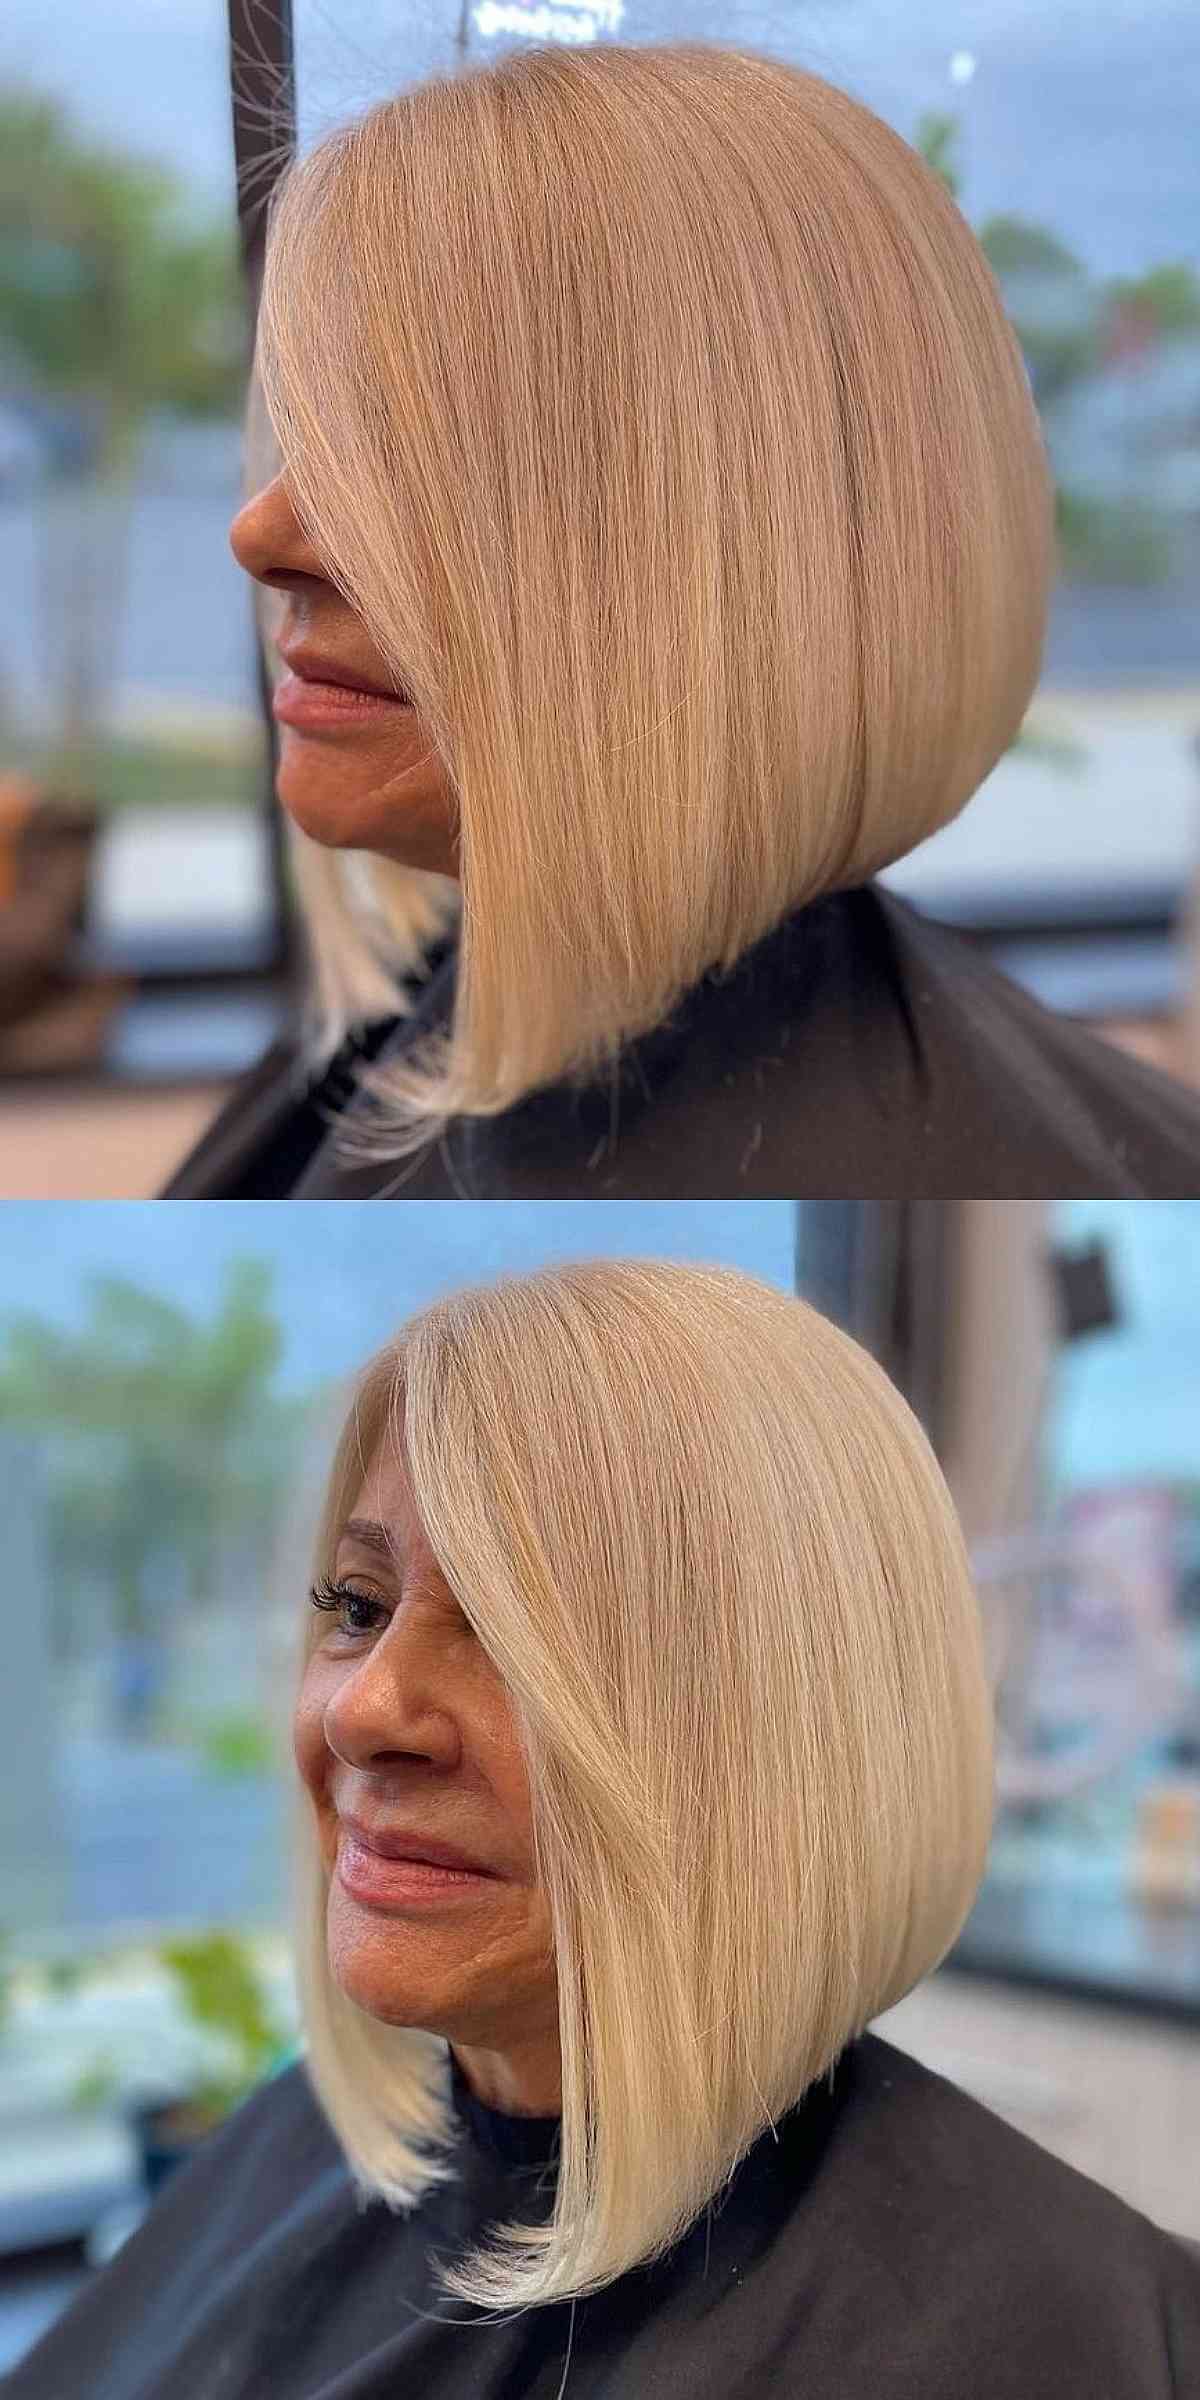 Long A-Line Bob on Straight Hair for Ladies 50 and Over